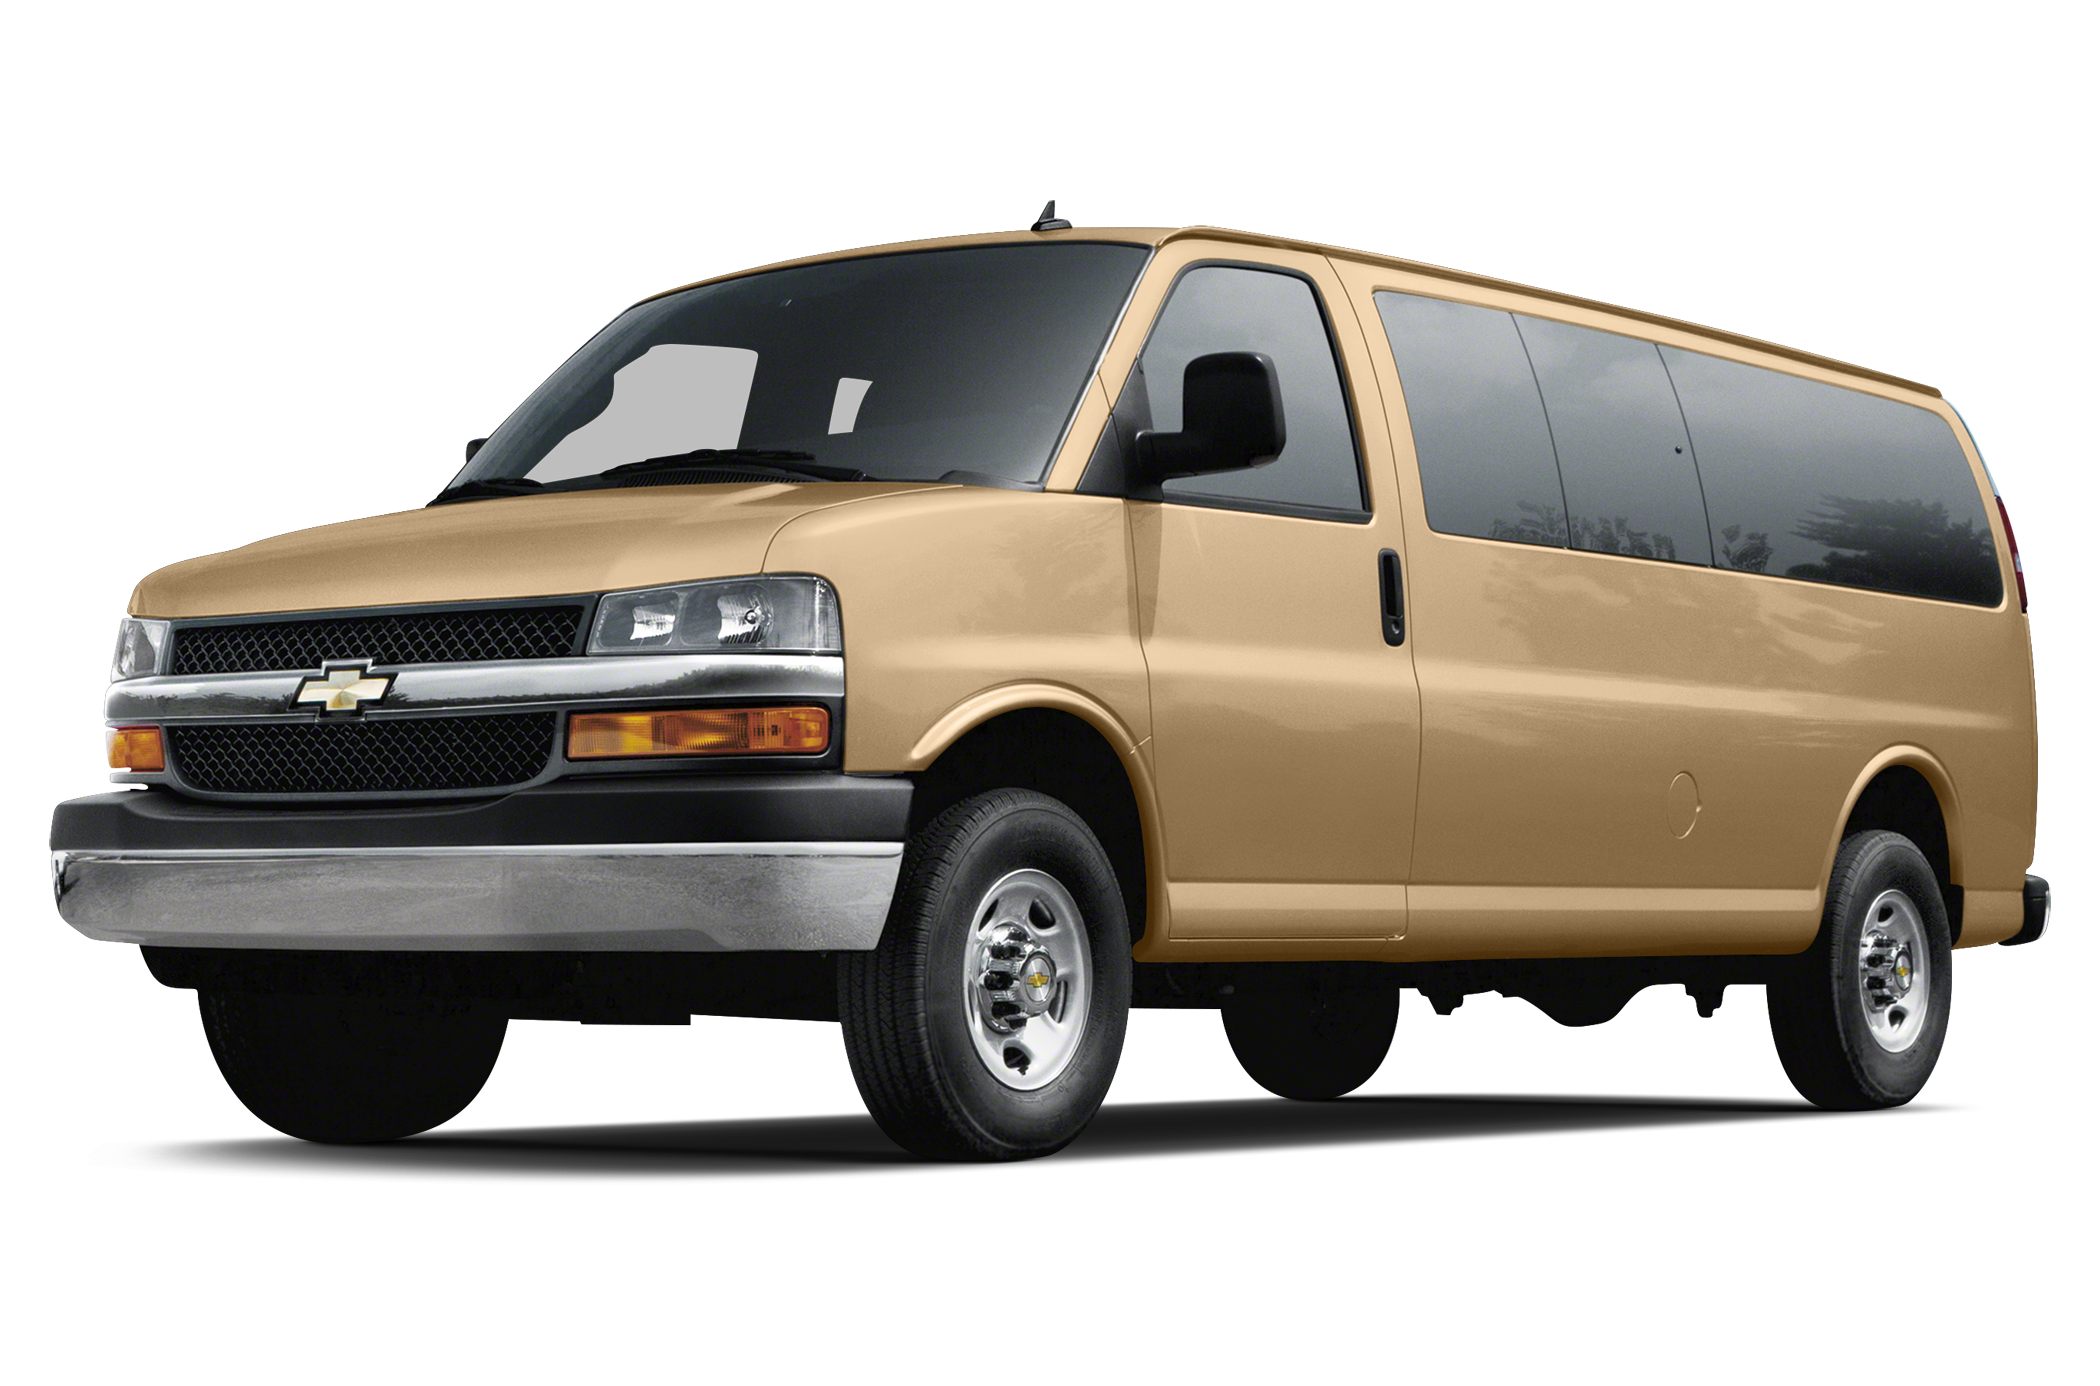 2018 Chevrolet Express 3500 Specs and 